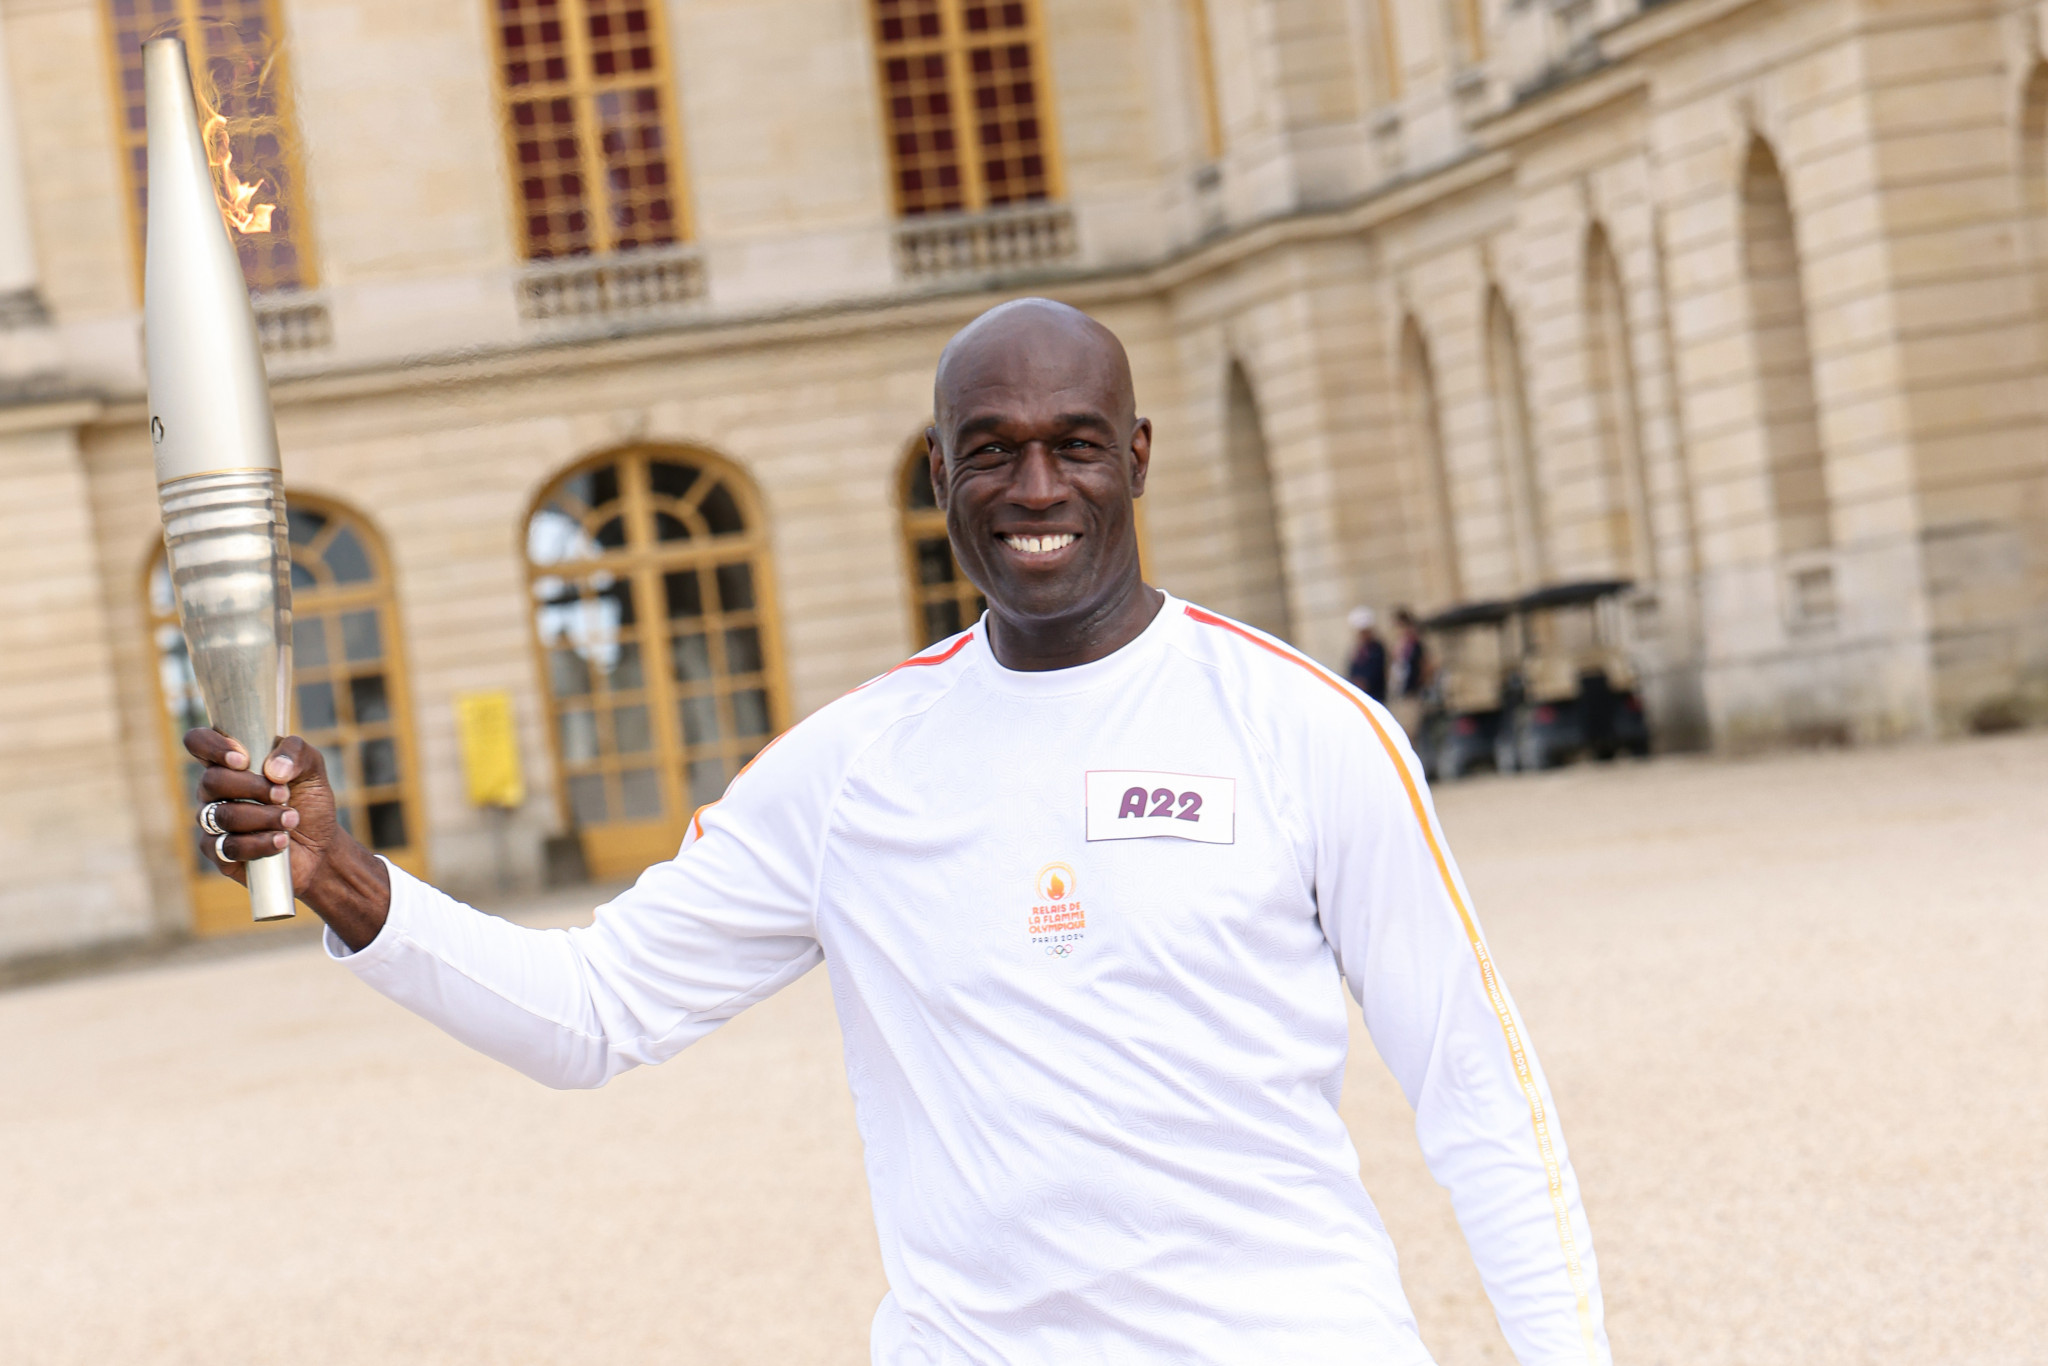 The torch relay is a stones throw away from the Opening Ceremony on 26 July. PARIS 2024